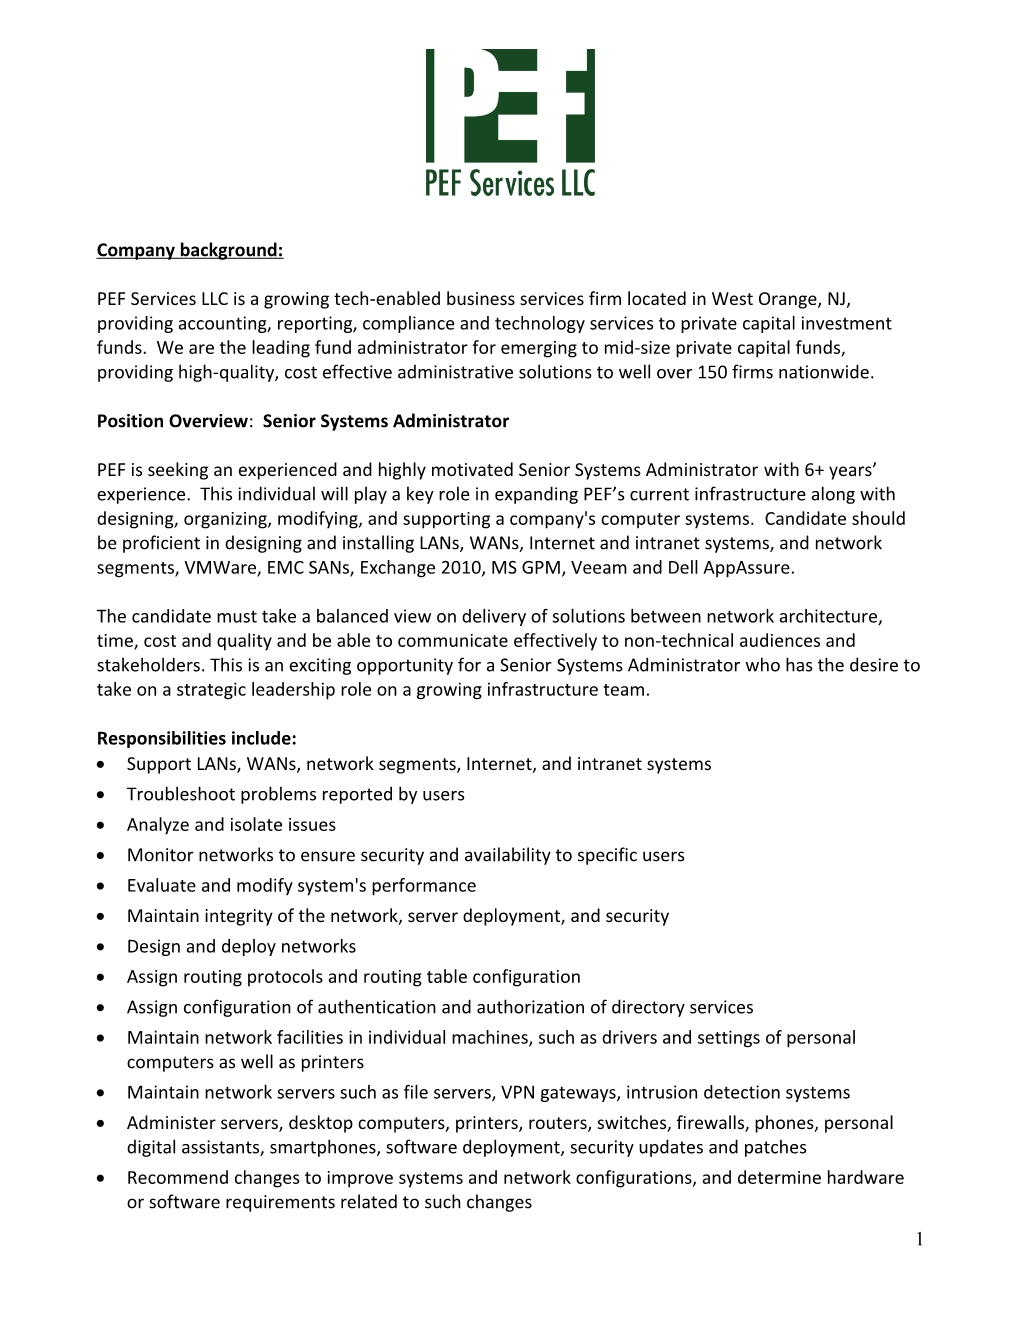 Position Overview: Senior Systems Administrator